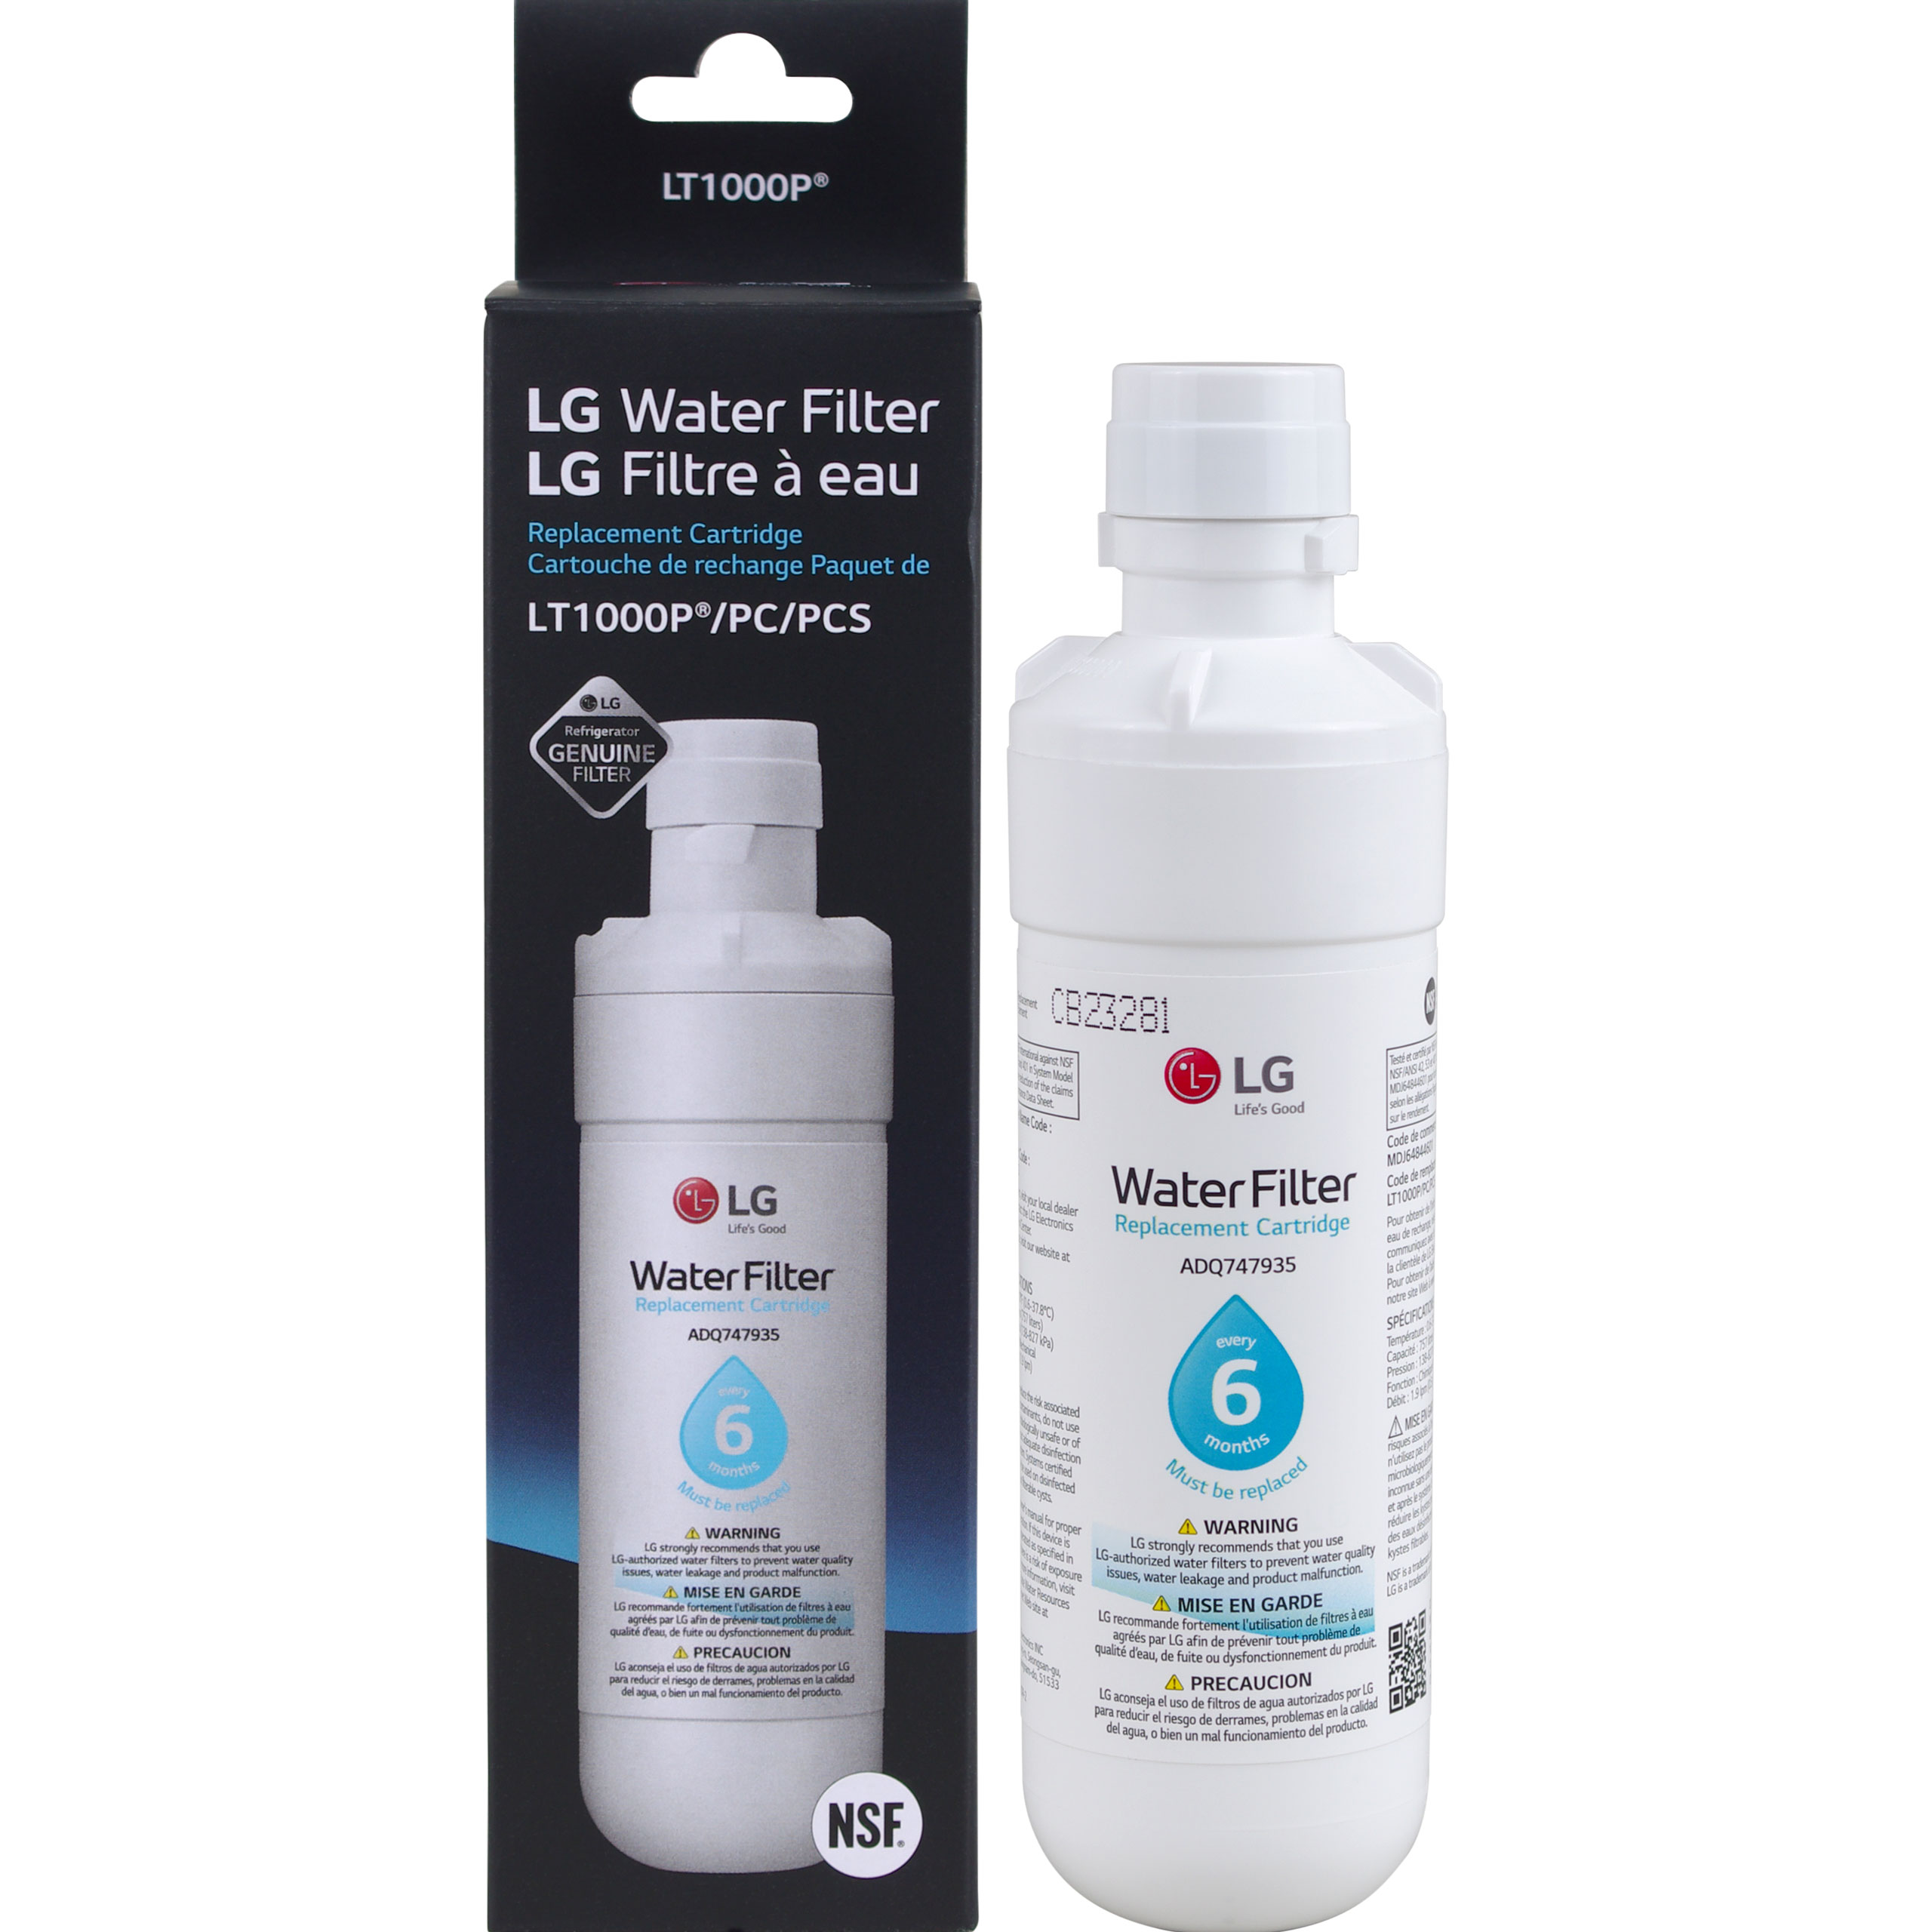 LG LT1000P-Replacement Refrigerator Water Filter for sale online